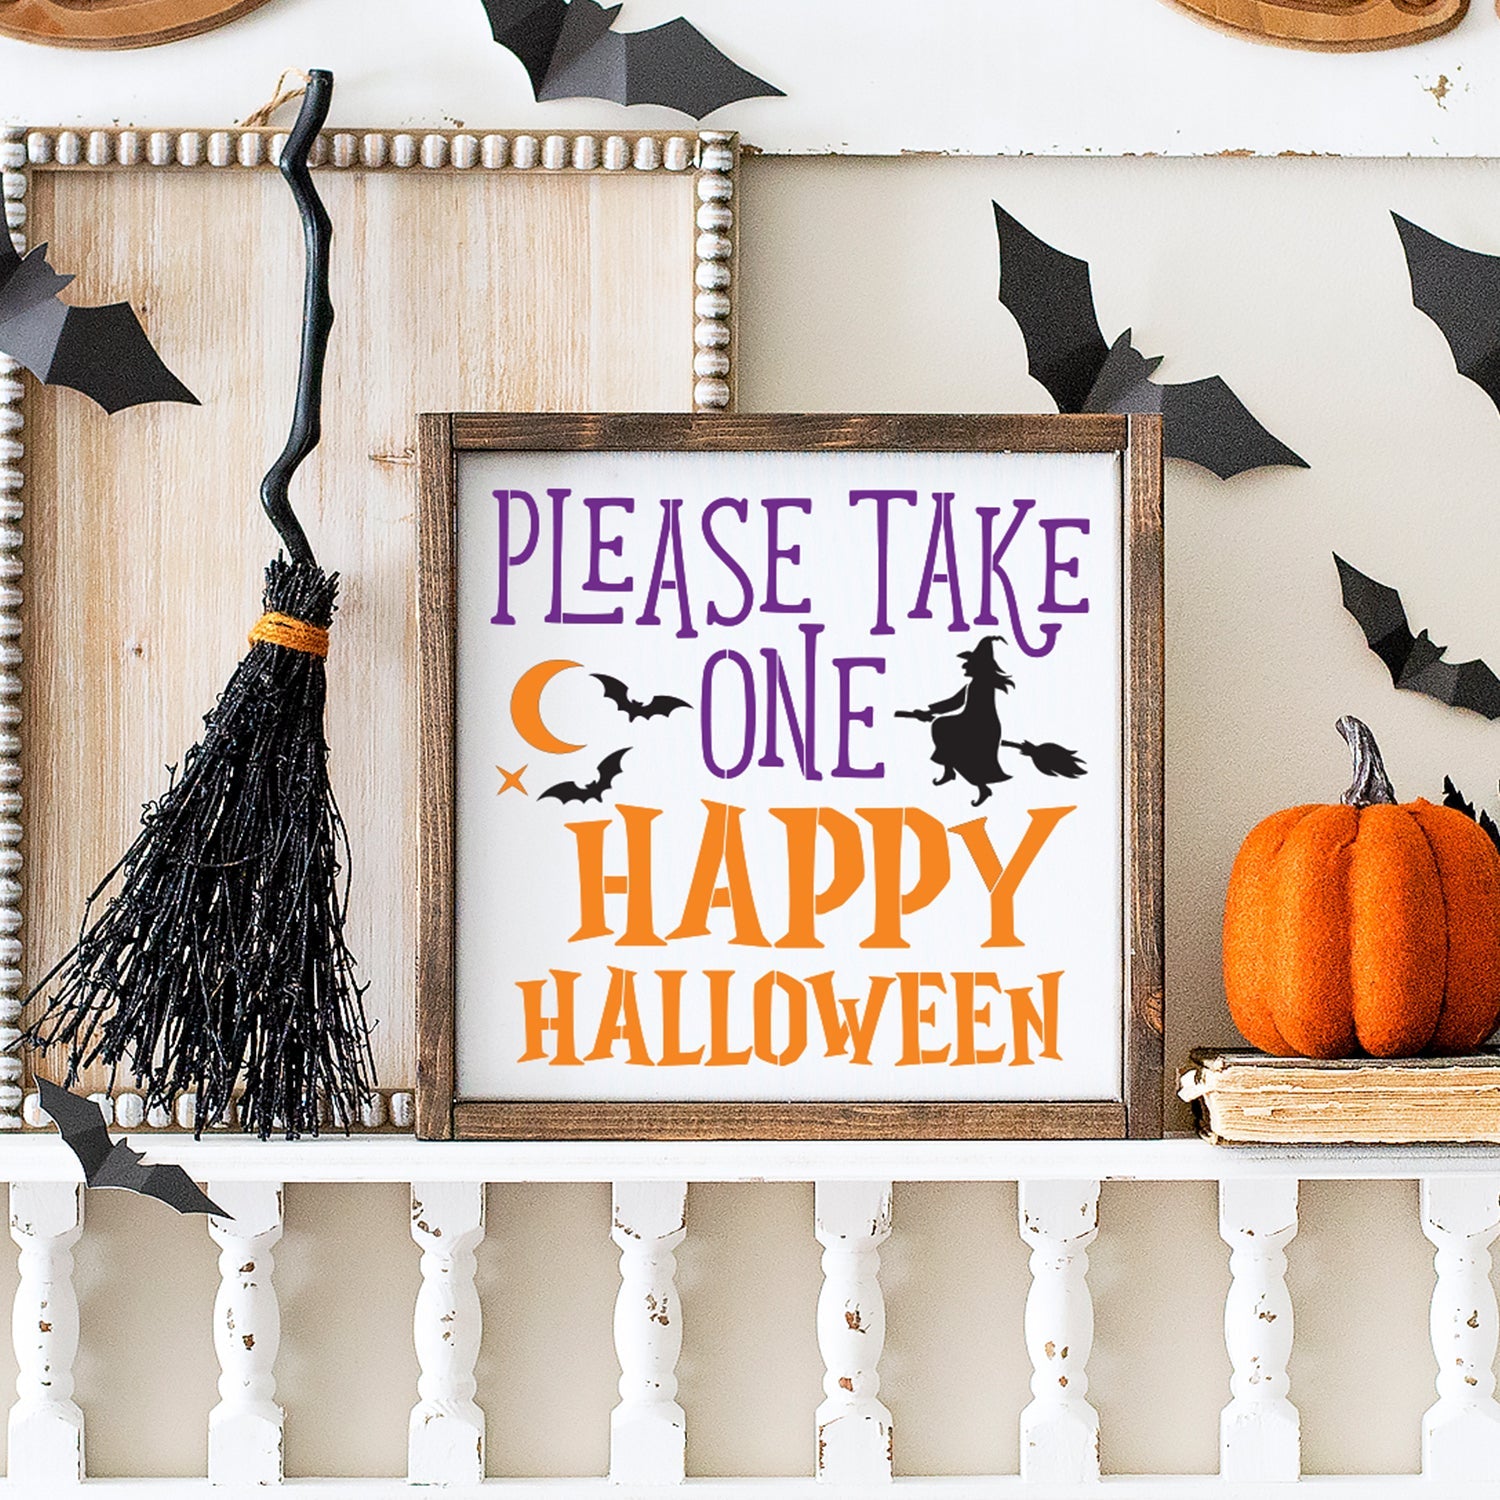 DIY reusable halloween wood sign stencils, diy reversible halloween candy and out of candy sign, please take one happy halloween sign sencil, diy booooo we are out of candy sign, halloween candy pattern, candy corns